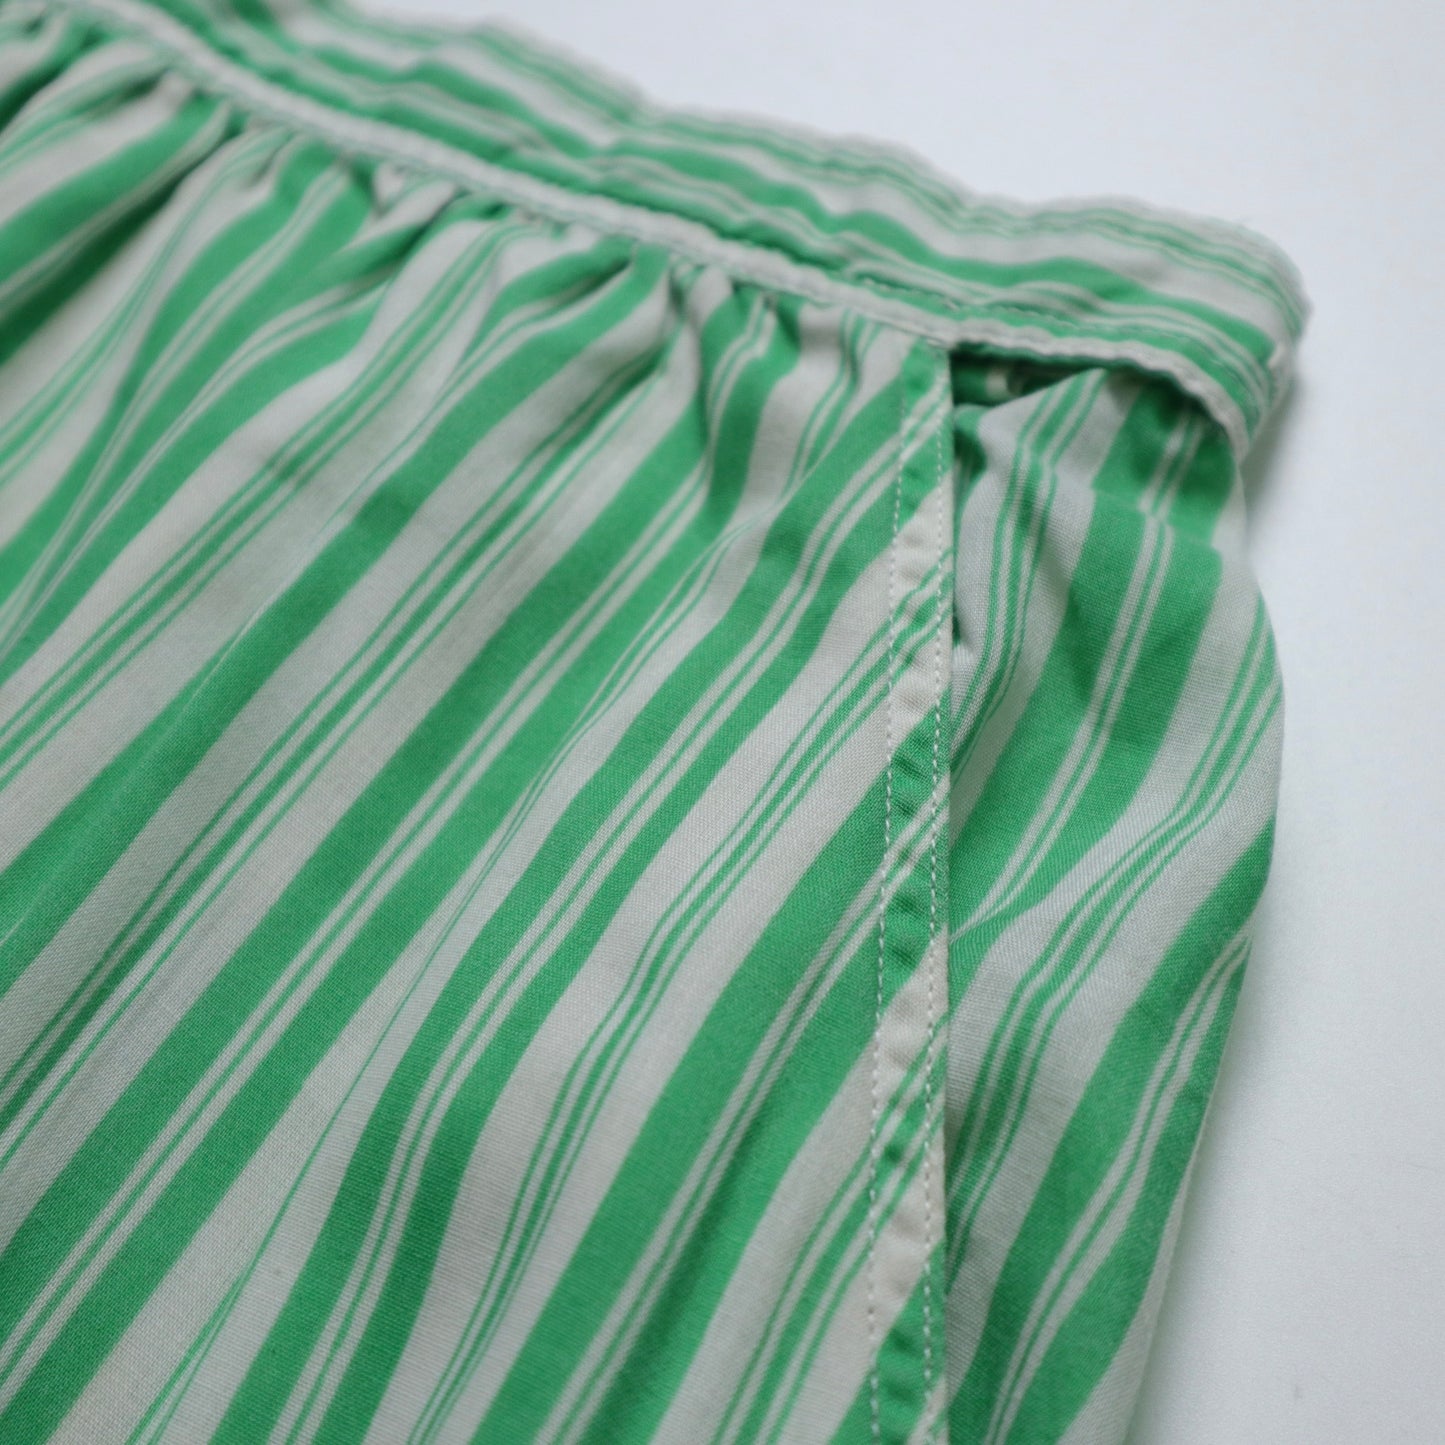 1970s American made green and white striped skirt ILGWU/Union made